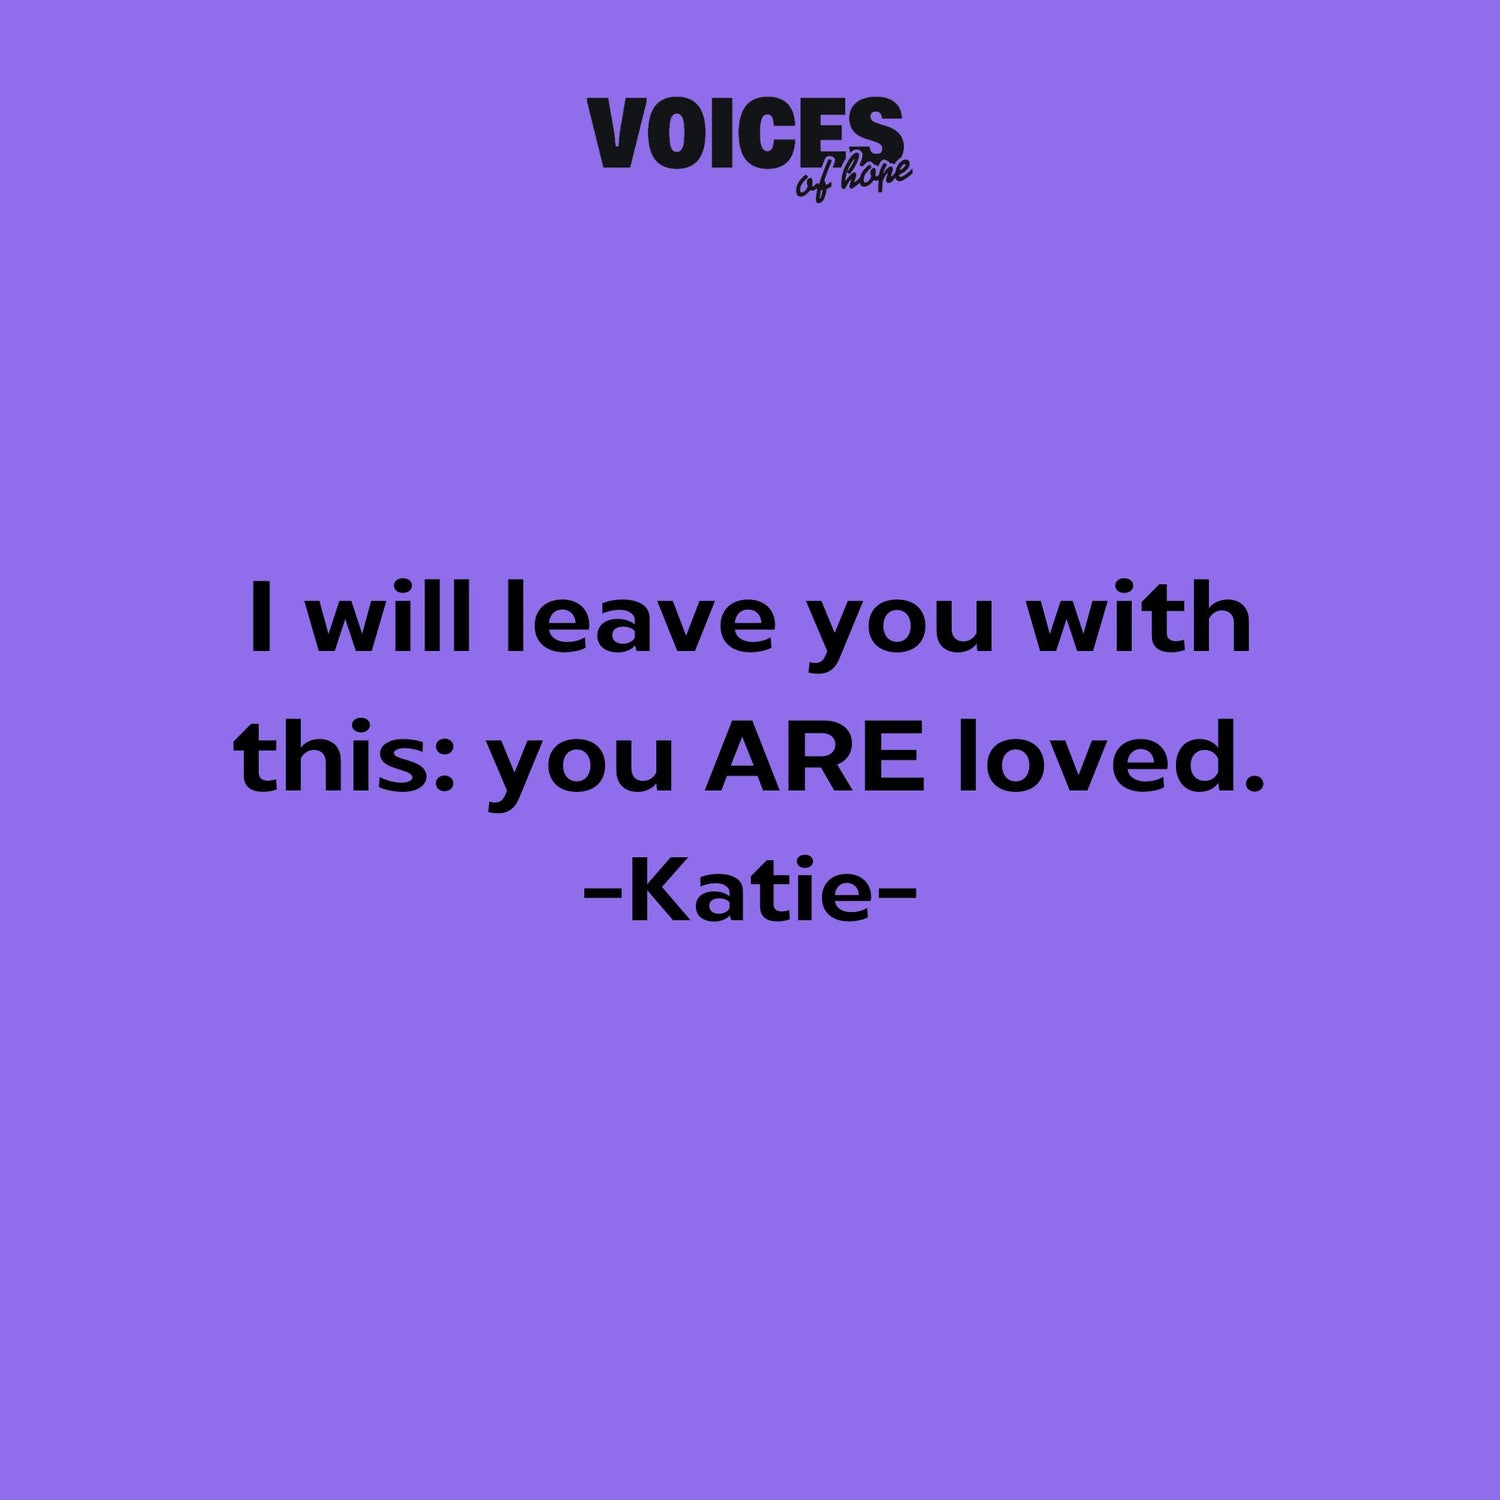 Purple background with black writing that reads: "I will leave you with this: you ARE loved. Katherine."